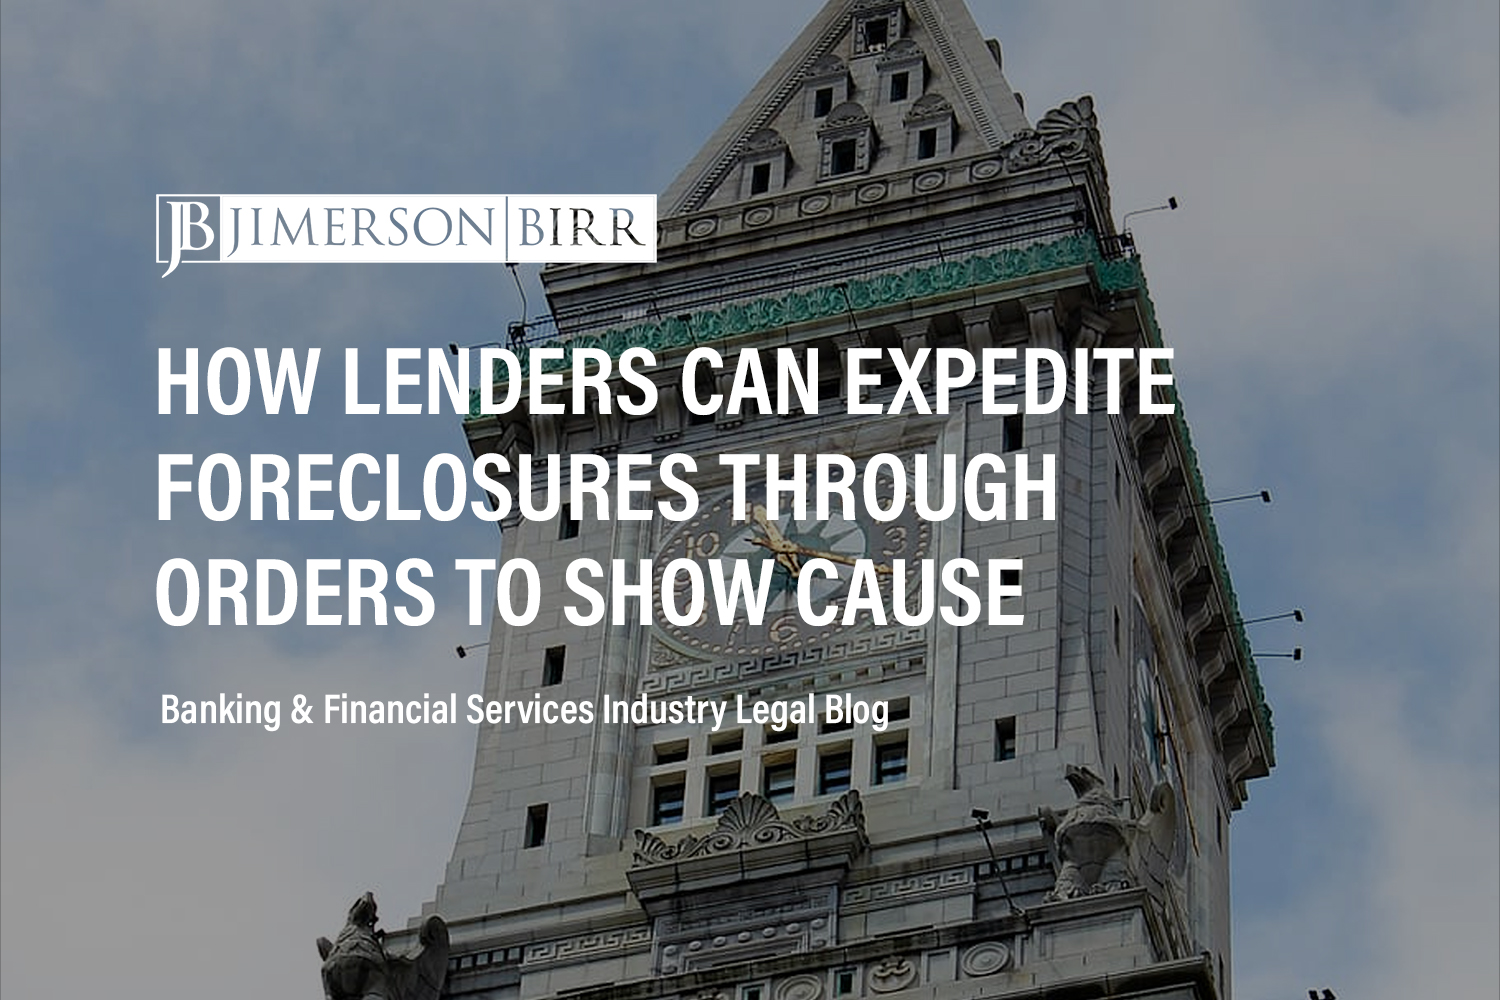 What Lenders Need to Know about Expediting Foreclosures Through § 702.10 Orders to Show Cause